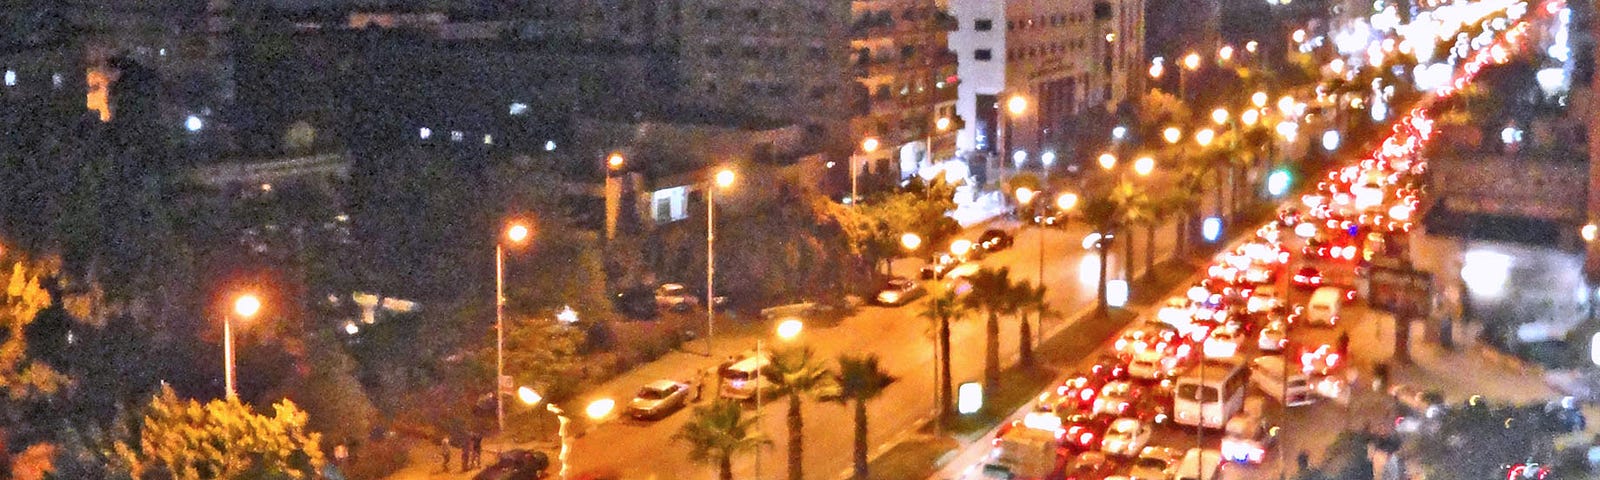 Nighttime heavy traffic on a wide 8-lane two-way road. Buildings are on both sides of the street. There are palm trees on the boulevard between traffic.